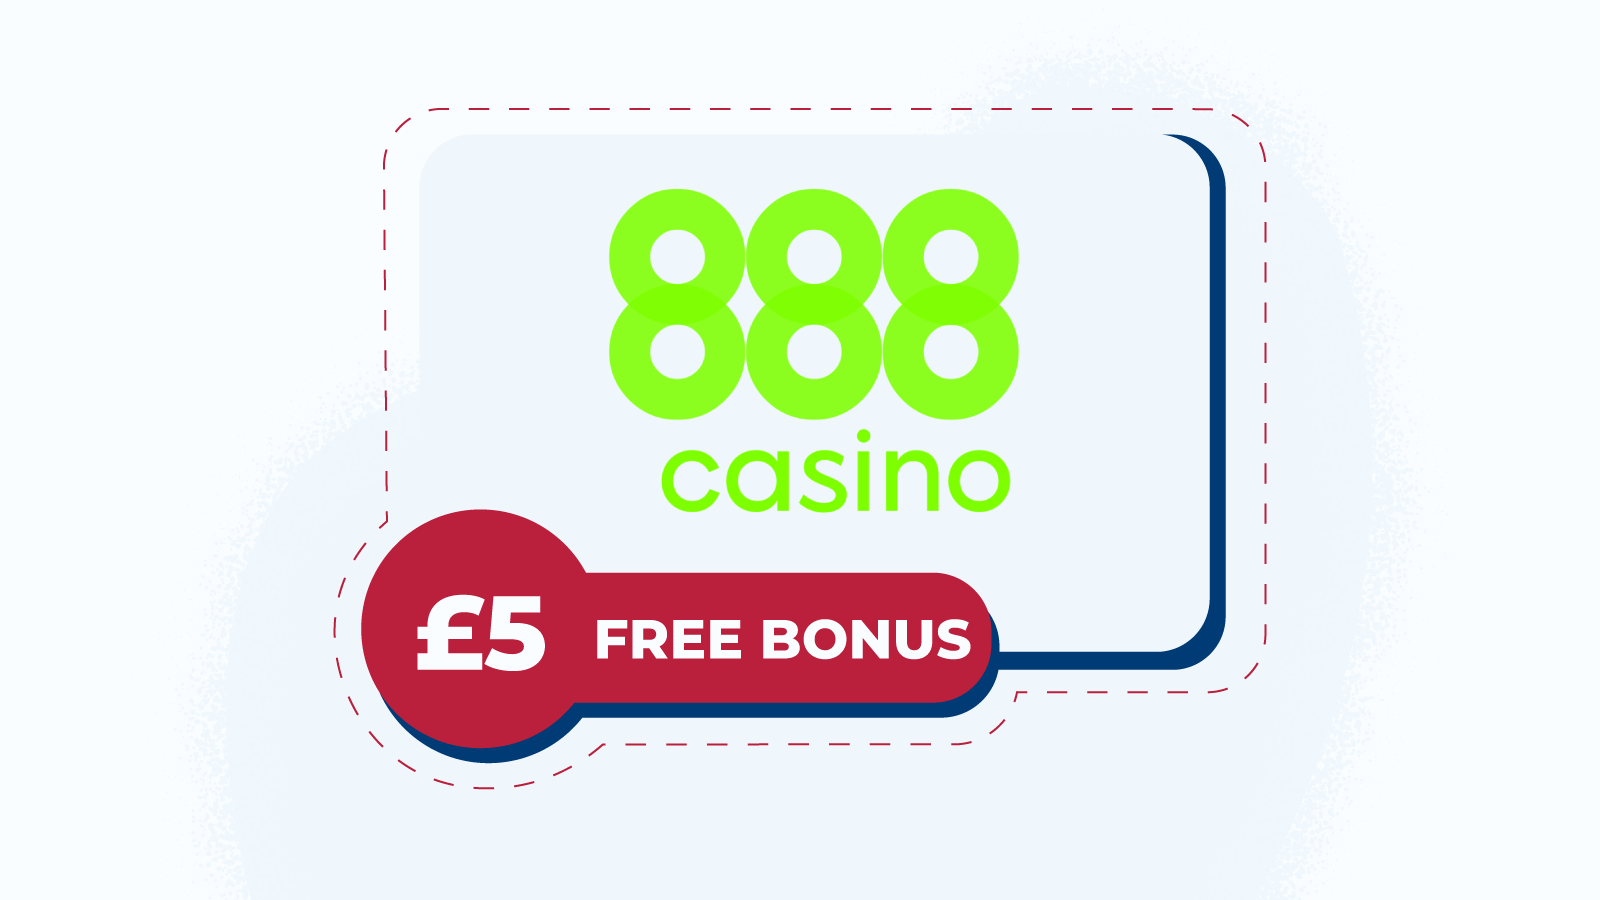 The £5 Free Bonus at 888casino Is Best If You Want Slots Variety